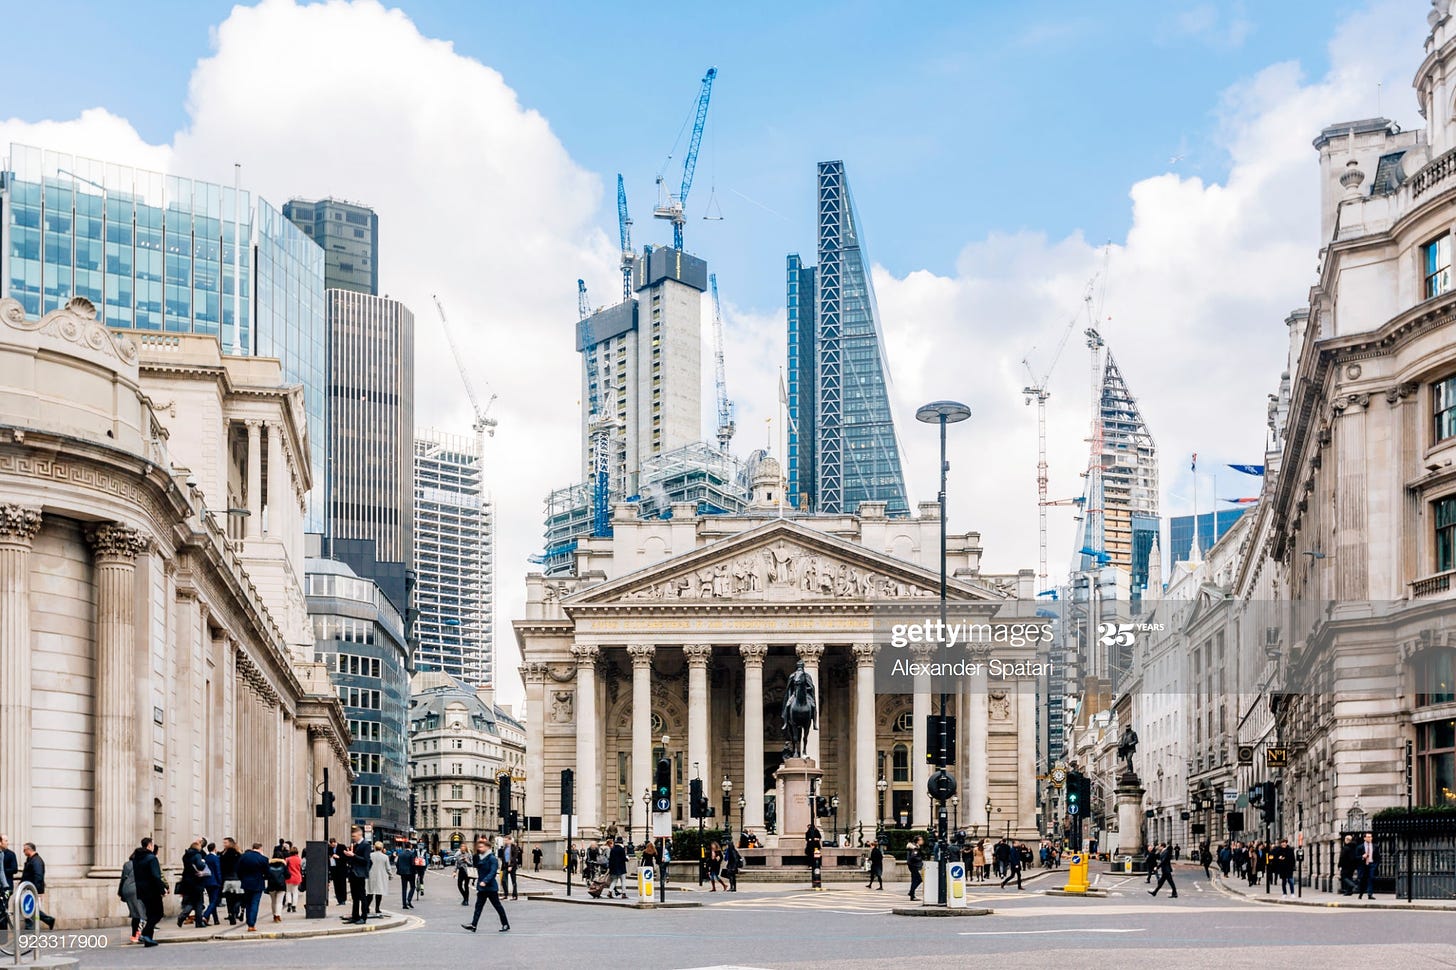 Street in City of London with Royal Exchange, Bank of England and new modern skyscrapers, England, UK : Stock Photo